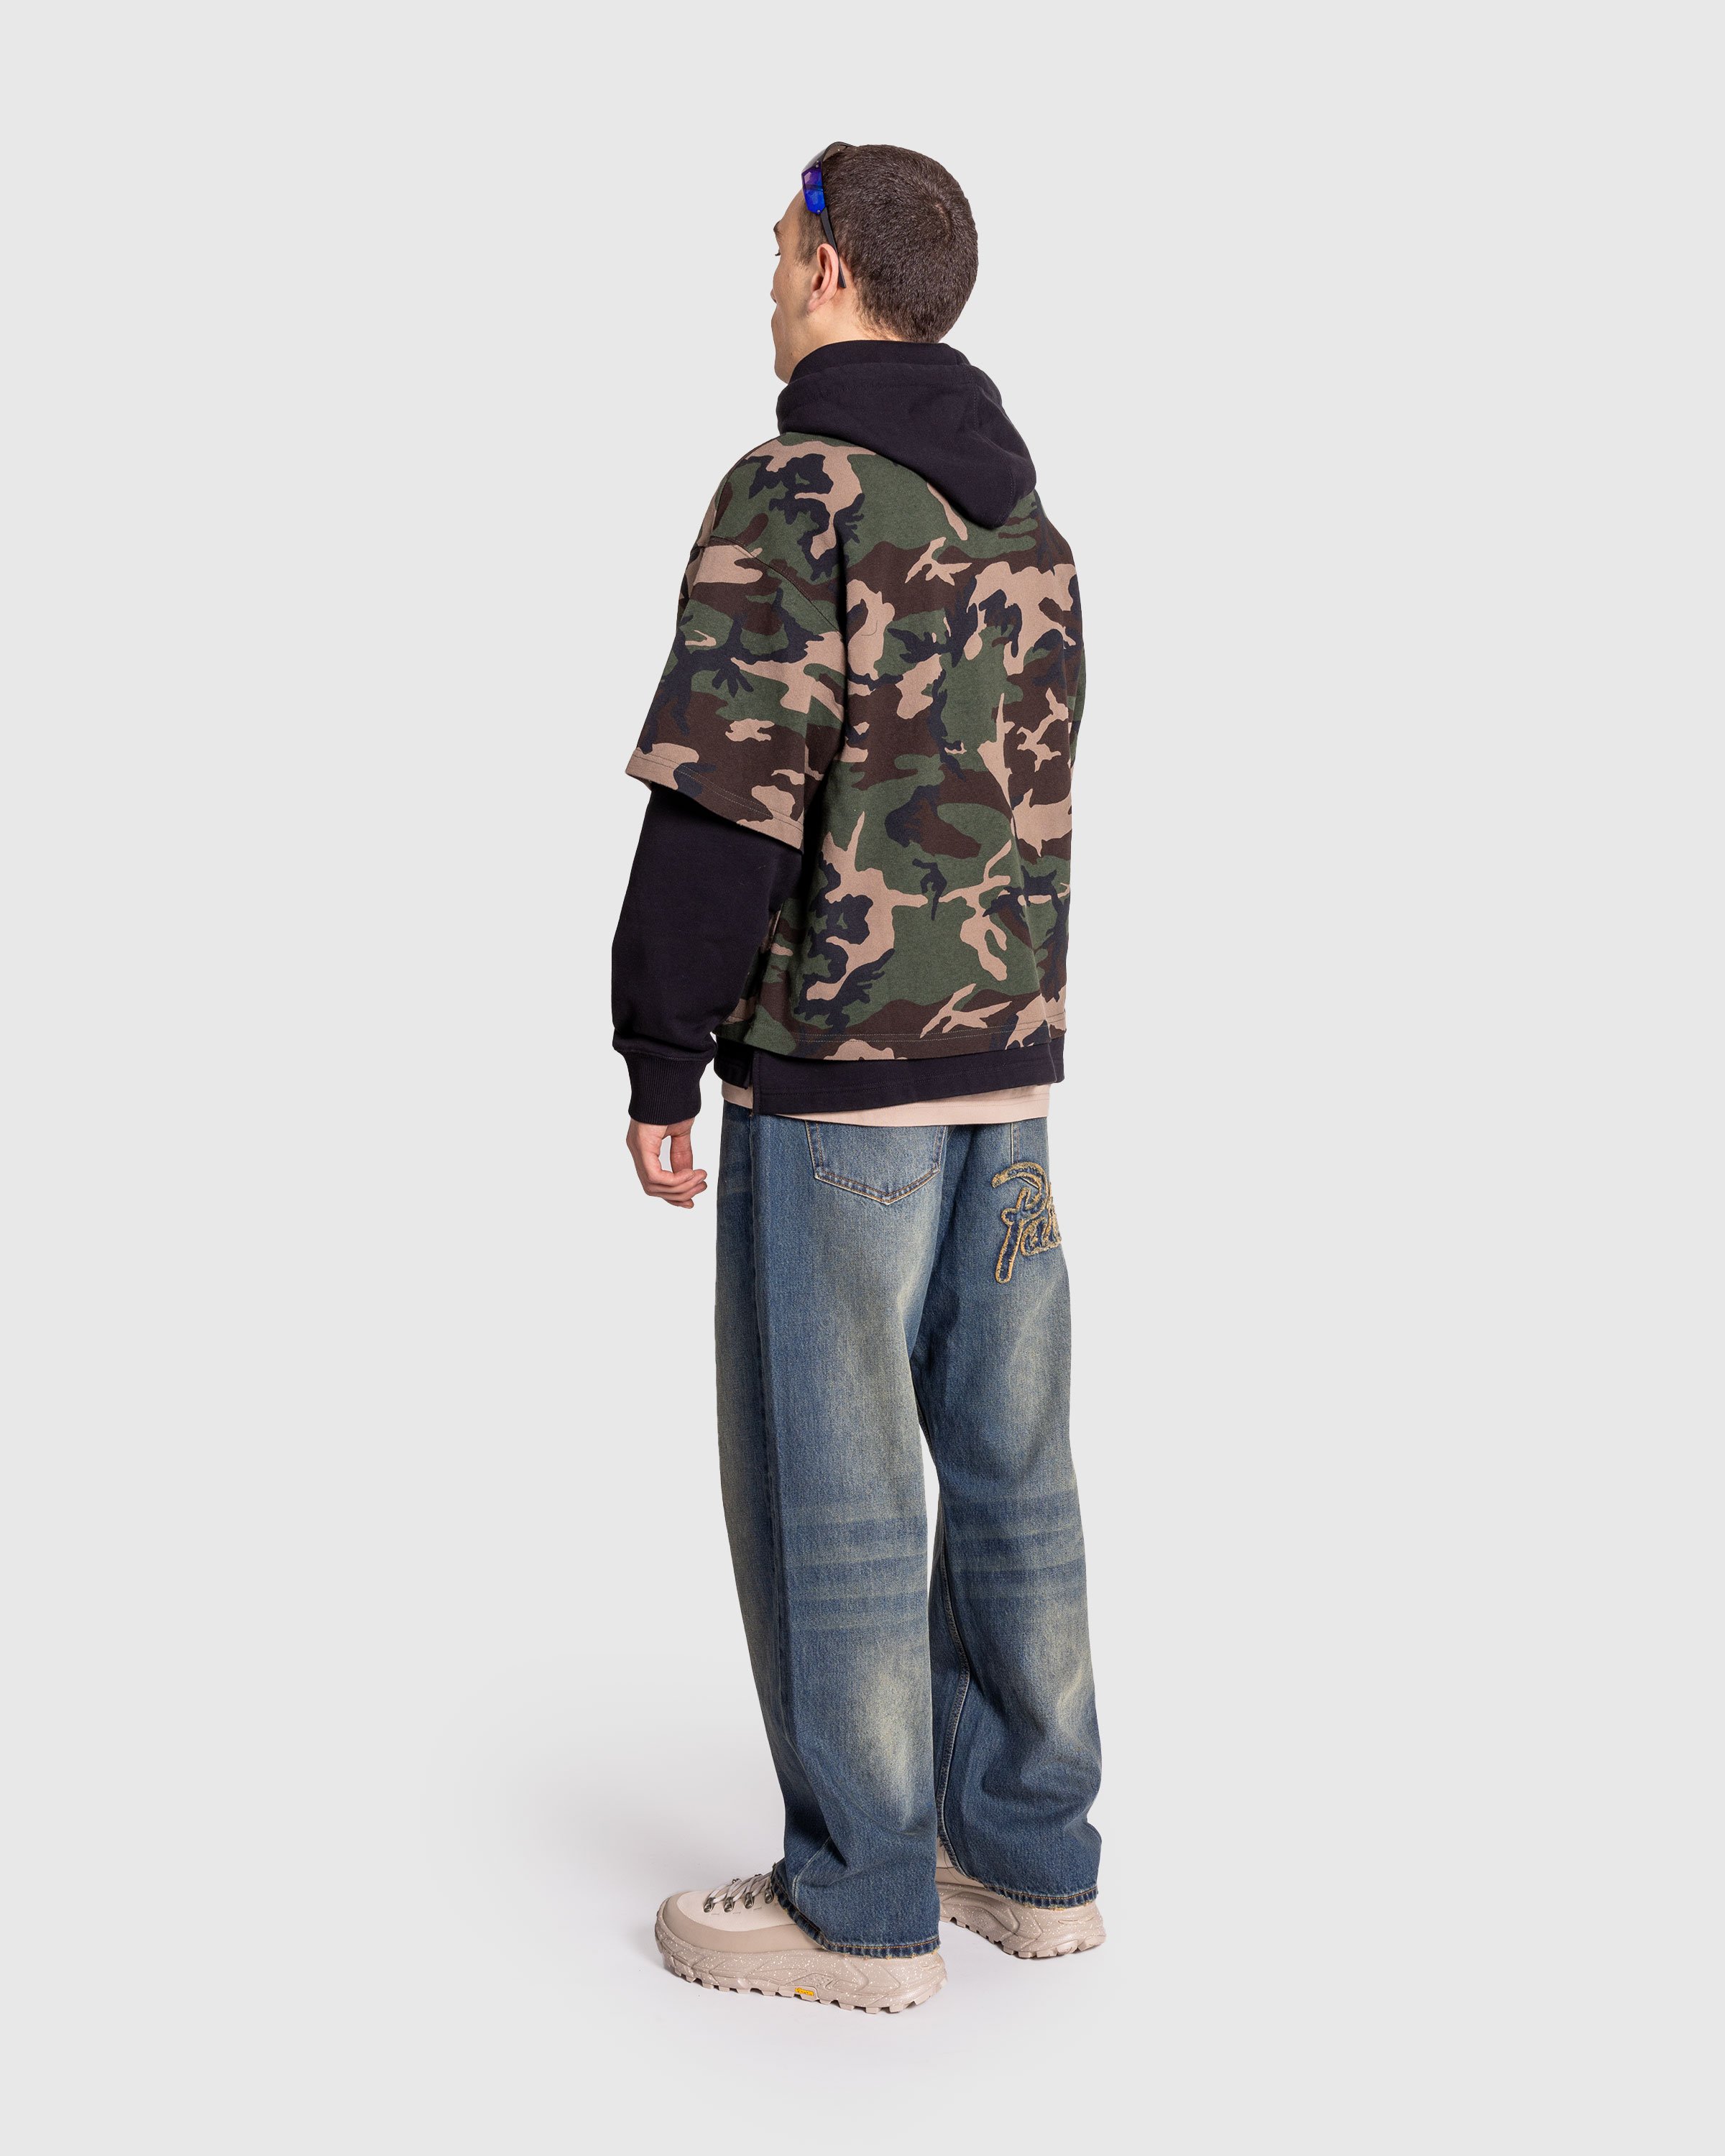 Patta - Always On Top Hooded Sweater Multi - Clothing - Multi - Image 4